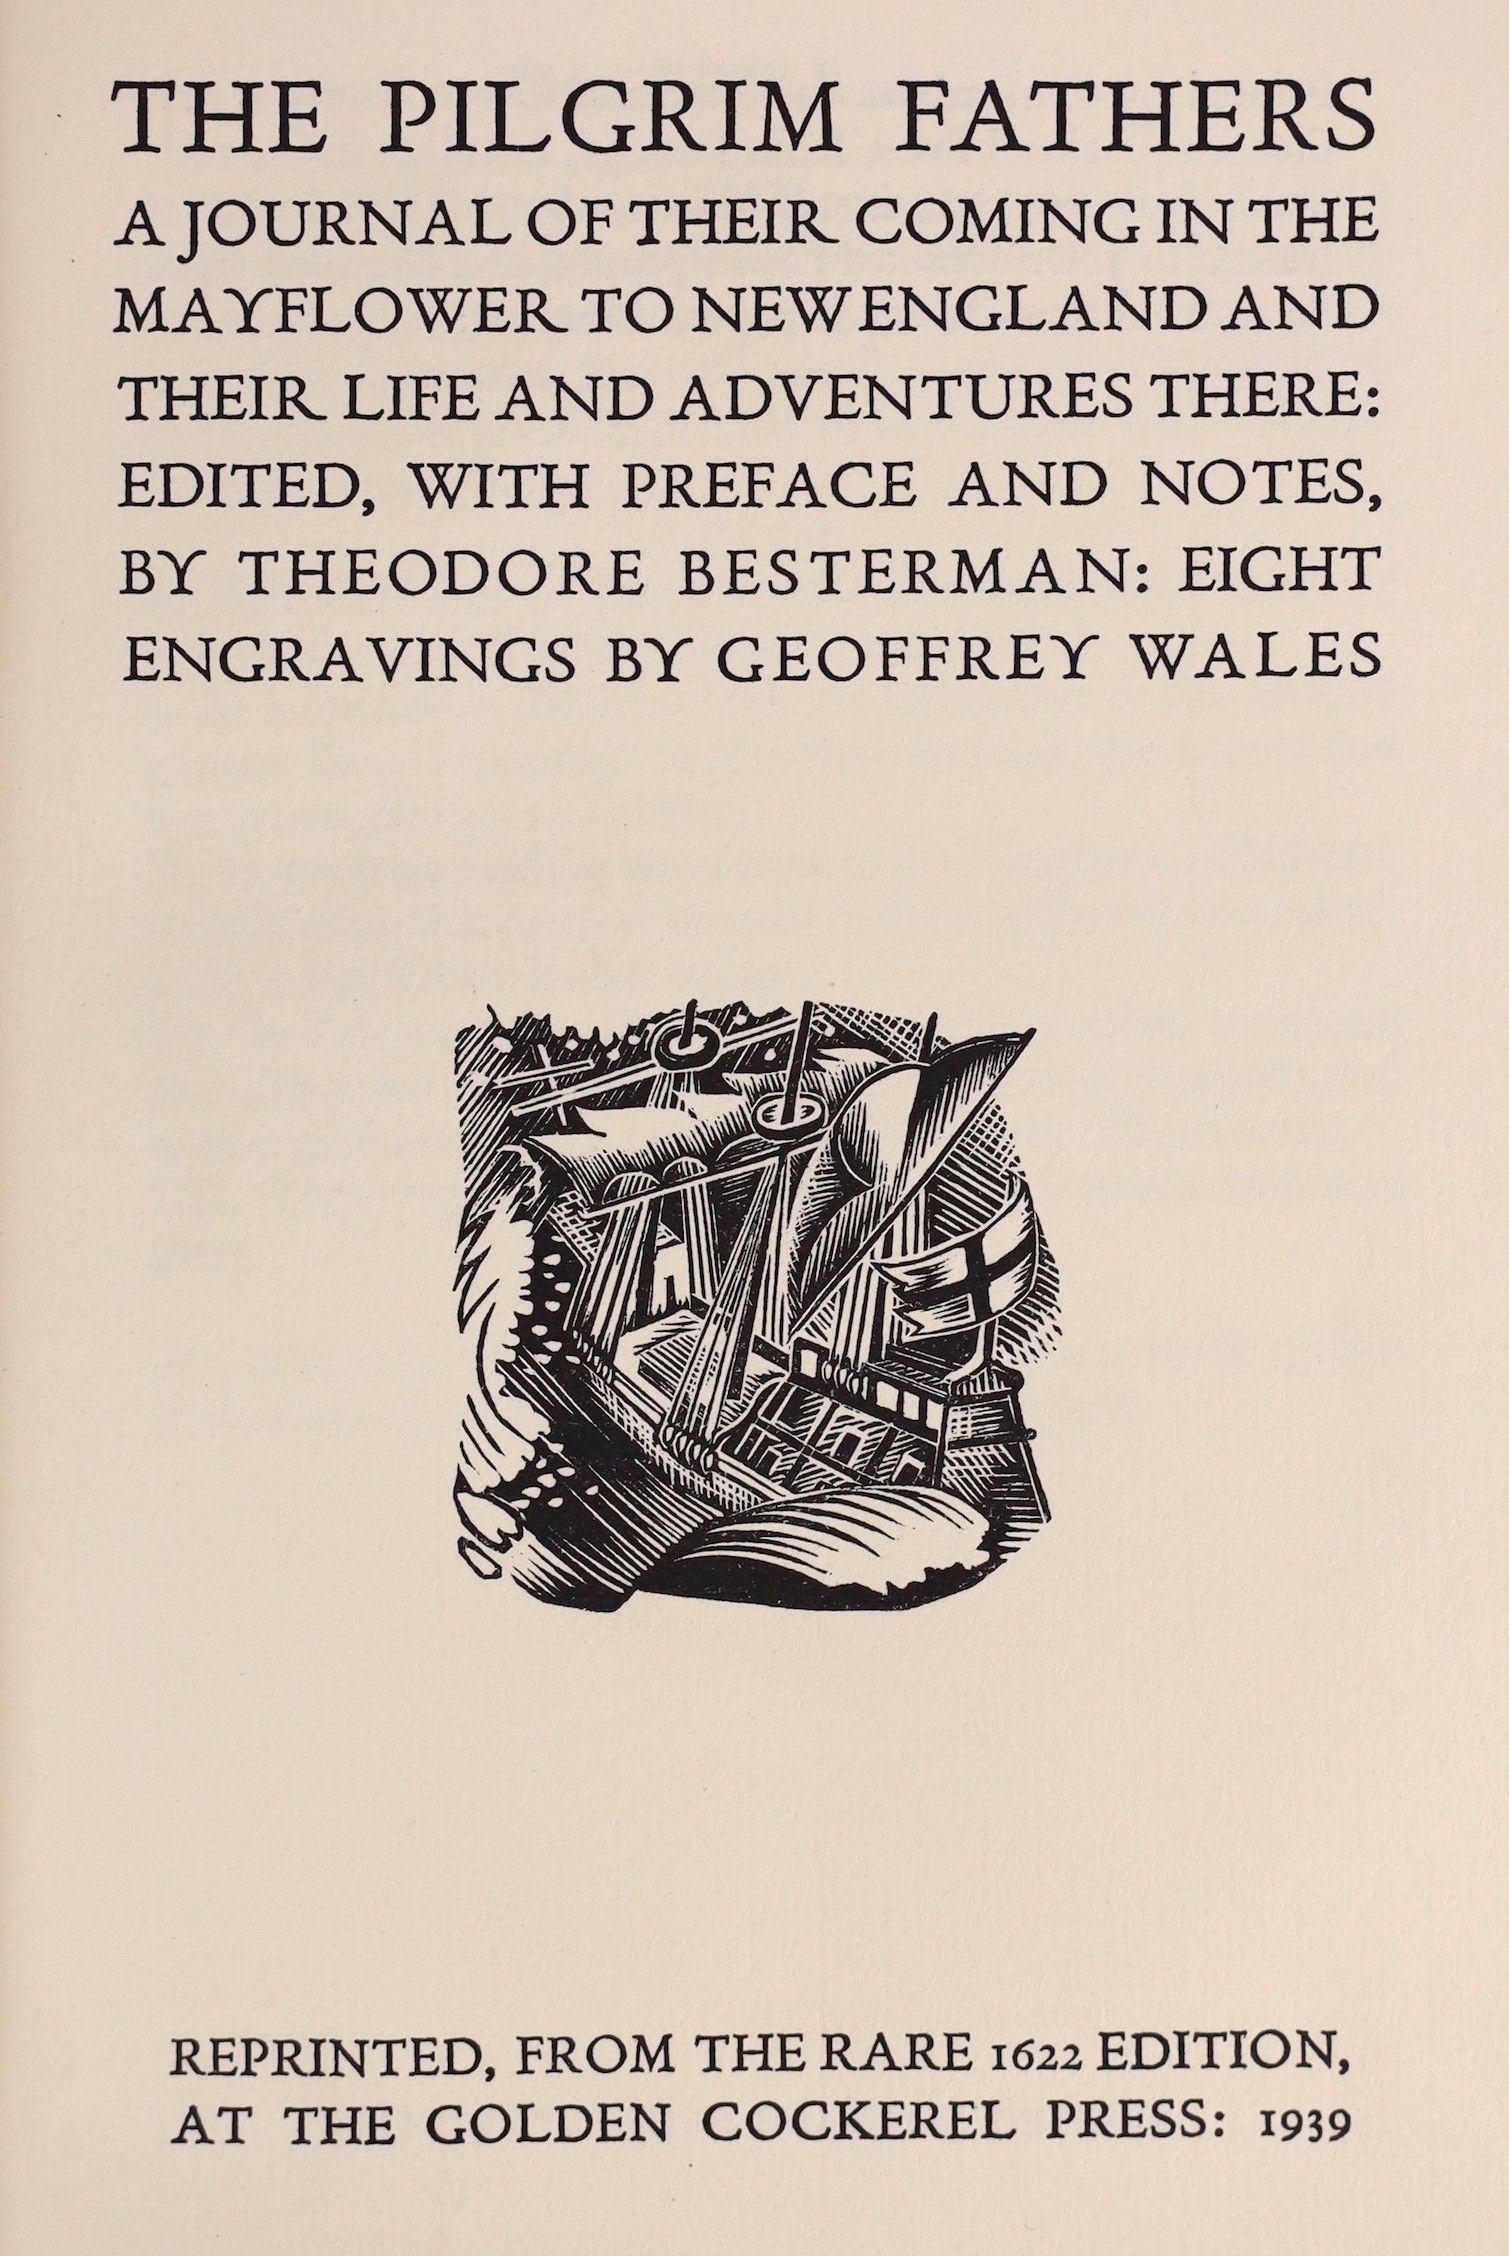 Golden Cockerel Press - Waltham Saint Lawrence, Berkshire - The Pilgrim Fathers, one of 300, edited by Theodore Bestermam, illustrated with 8 engravings by Geoffrey Wales, 1939                                            